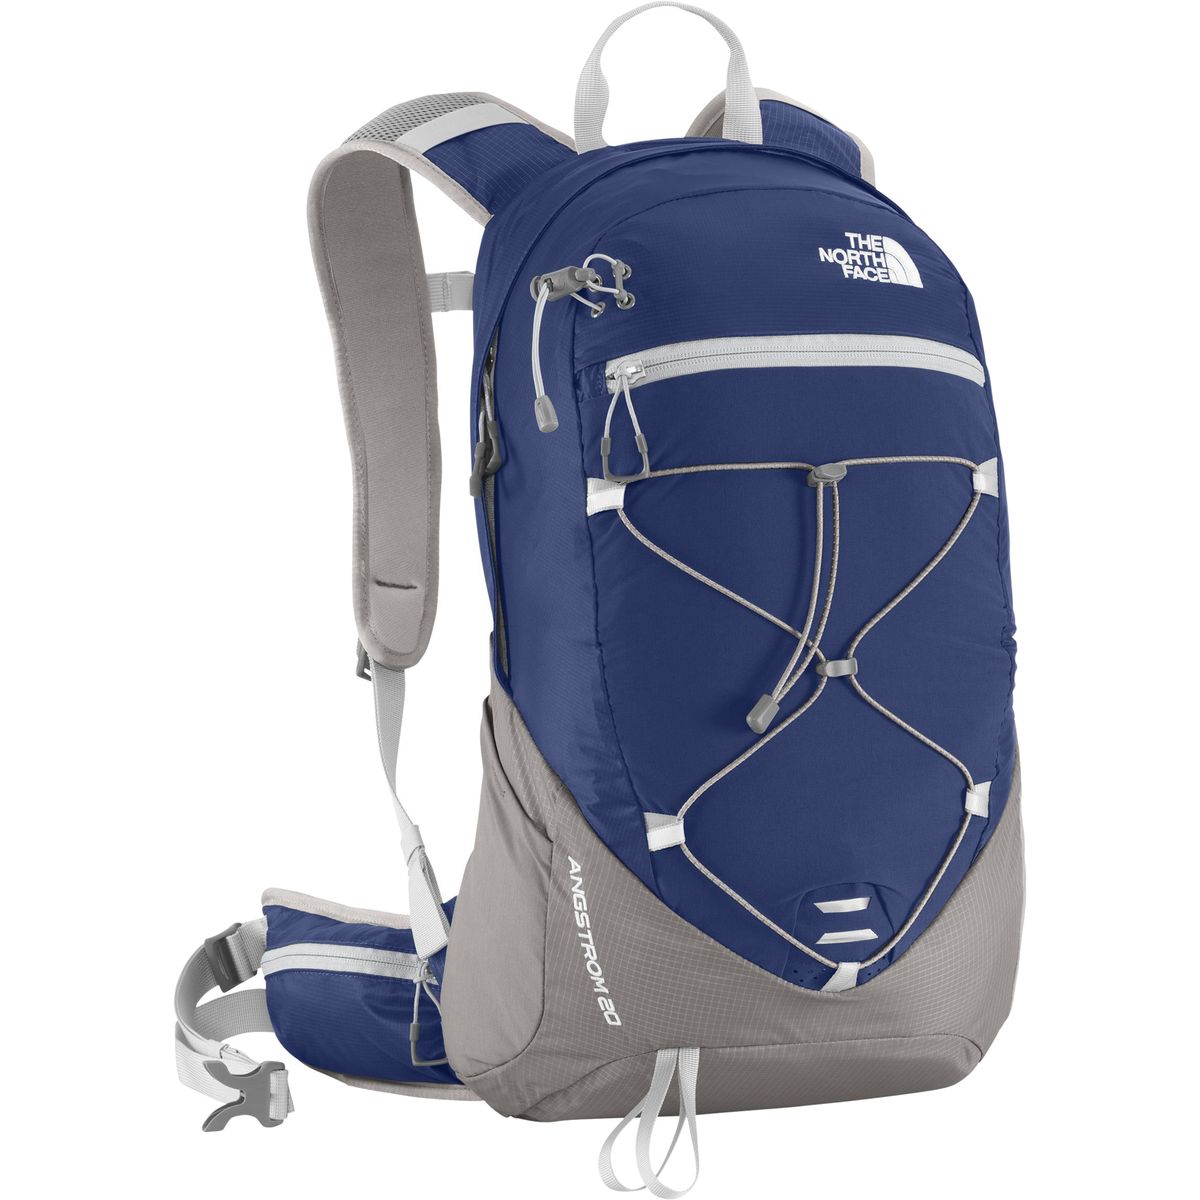 Verslaggever hurken Auckland The North Face Angstrom 20 Backpack - 1220cu in - Hike & Camp